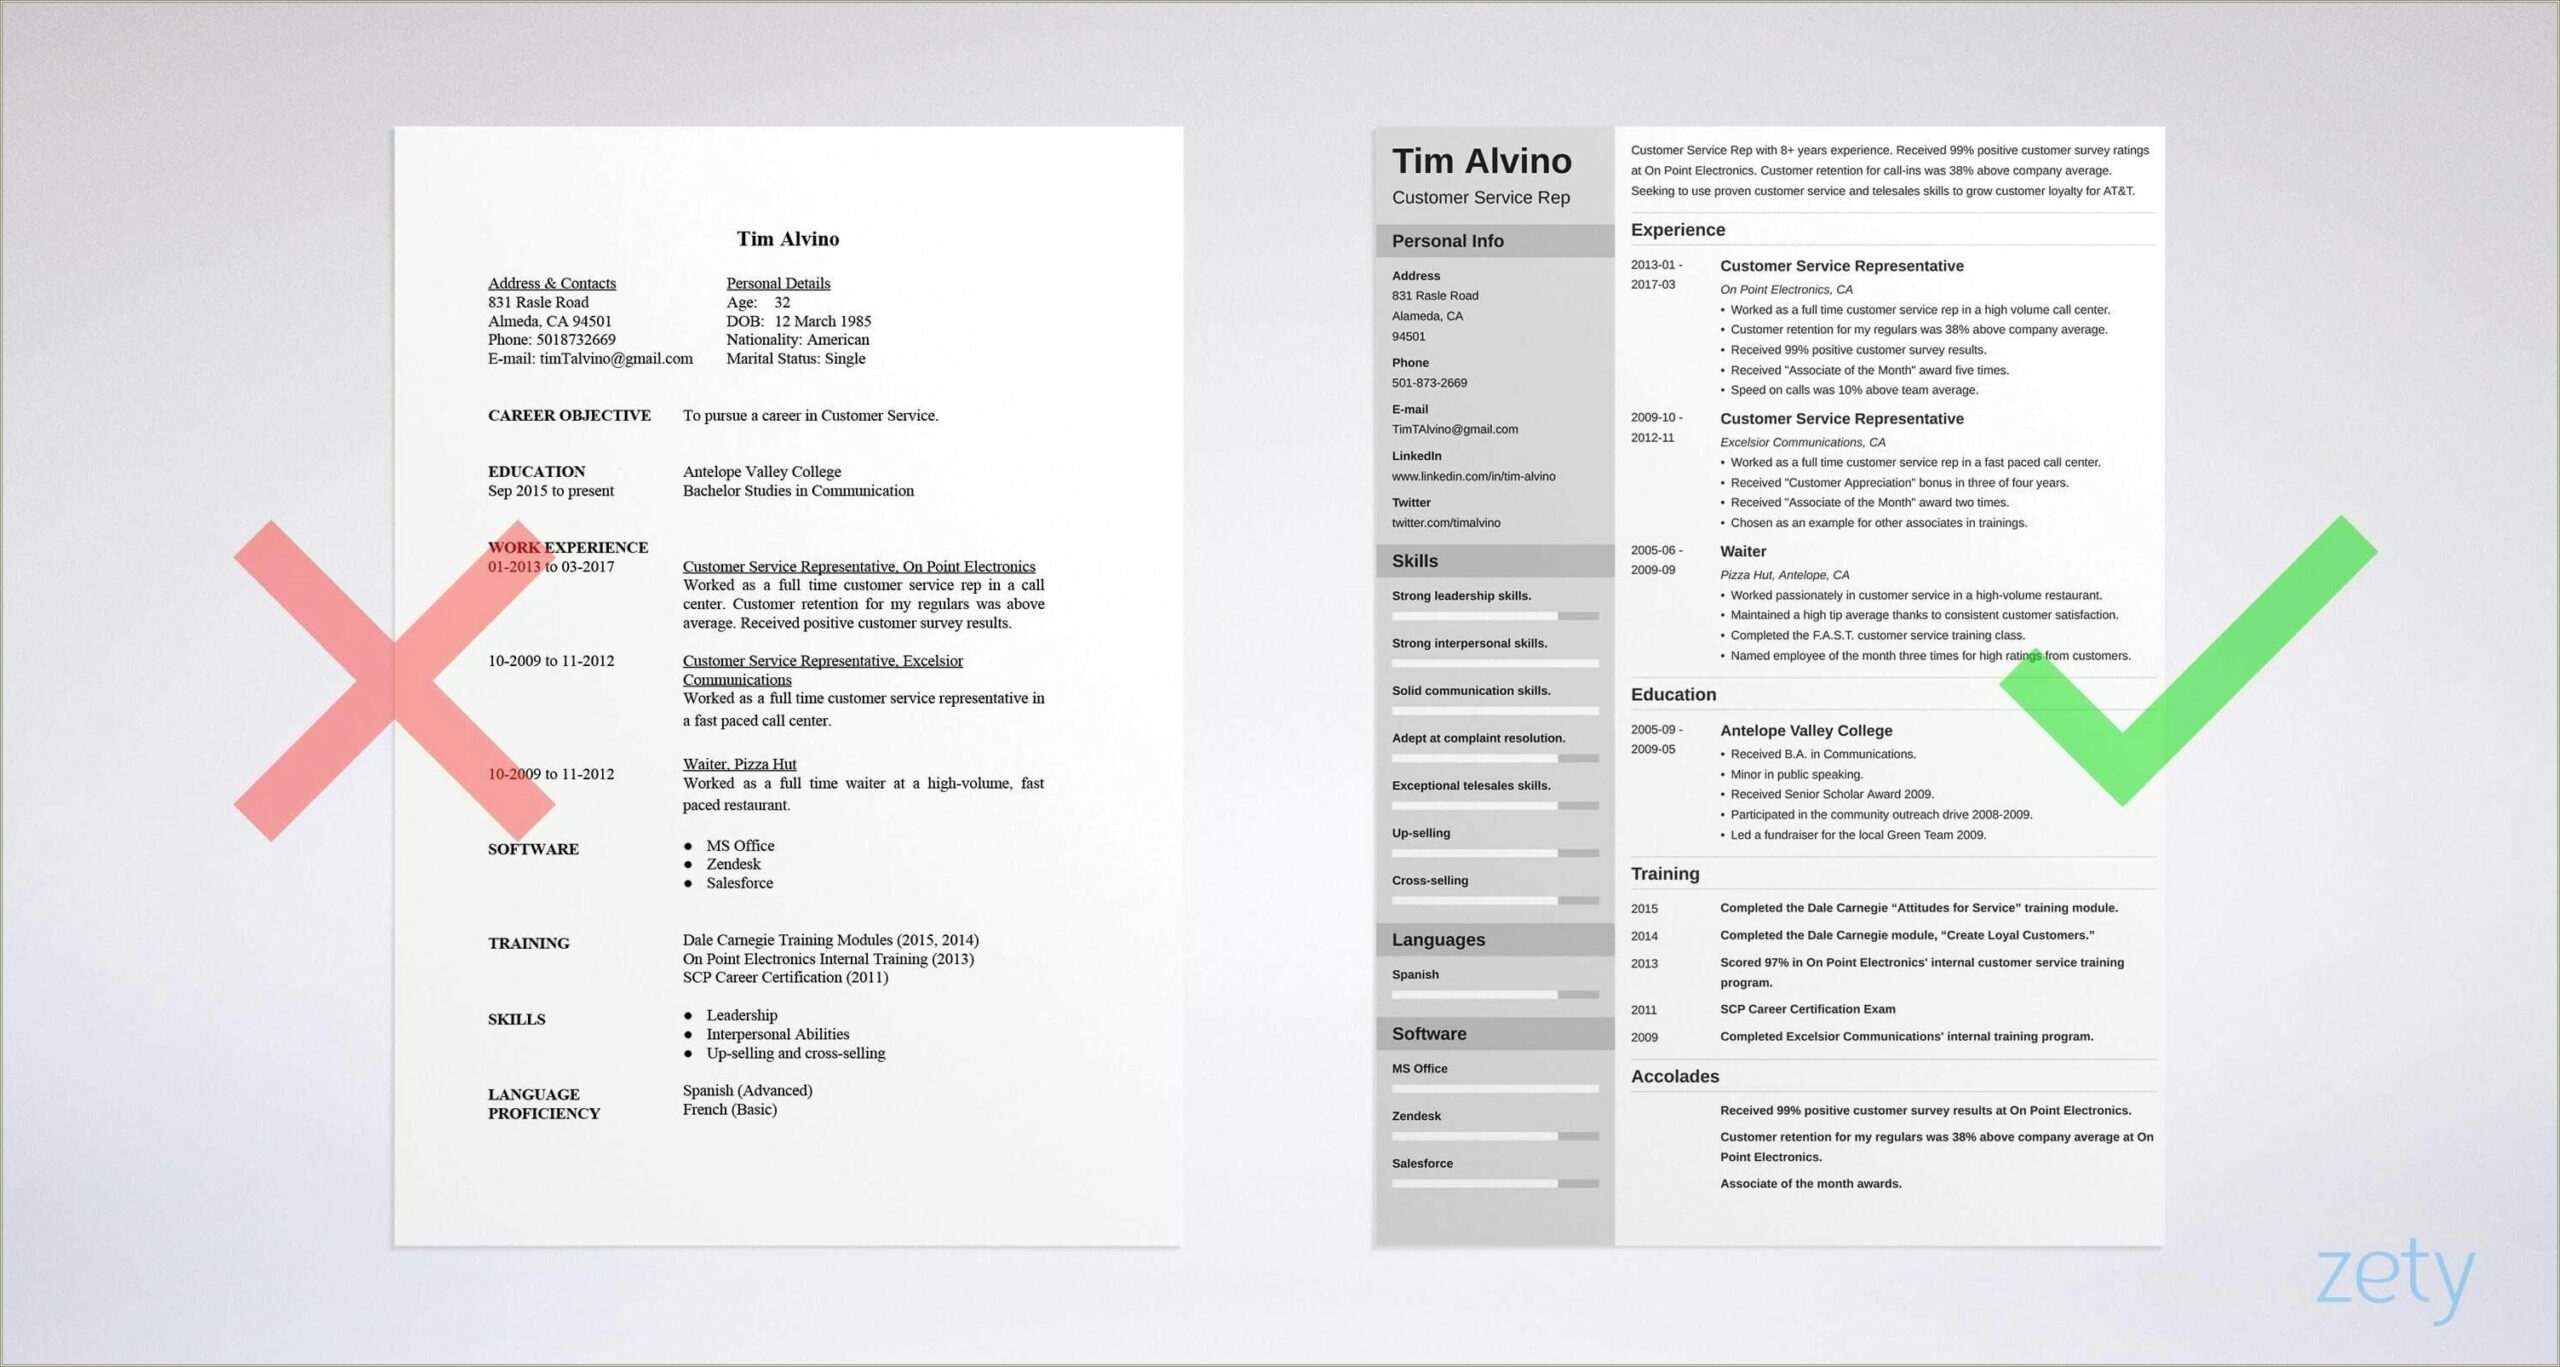 Resume Objective Templates For Customer Service